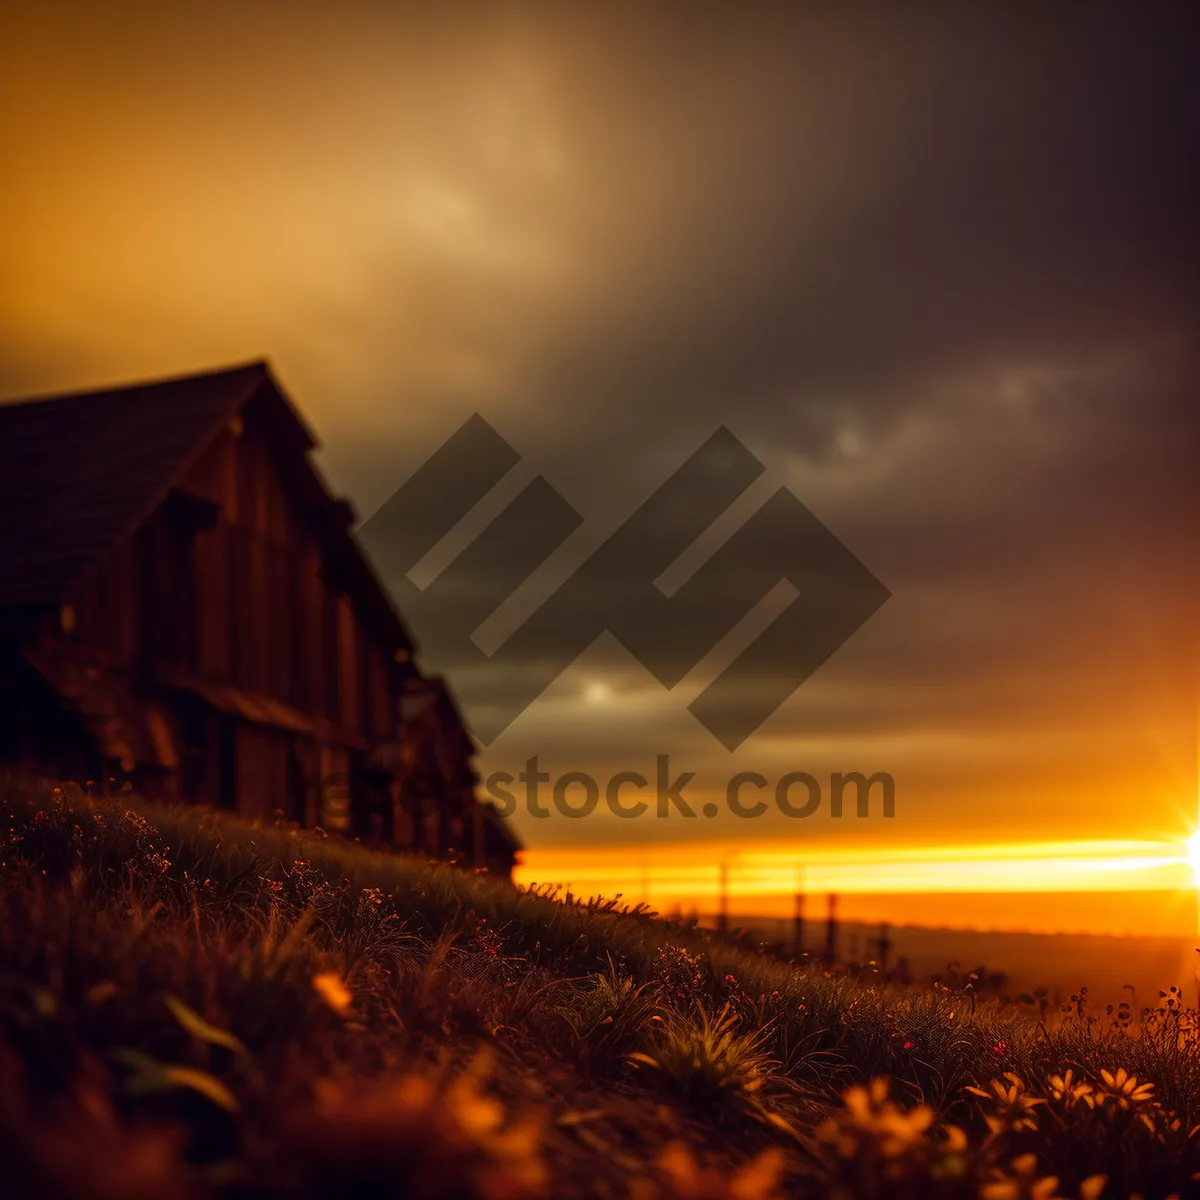 Picture of Rustic Charm at Sunset: Barn amidst Orange Sky